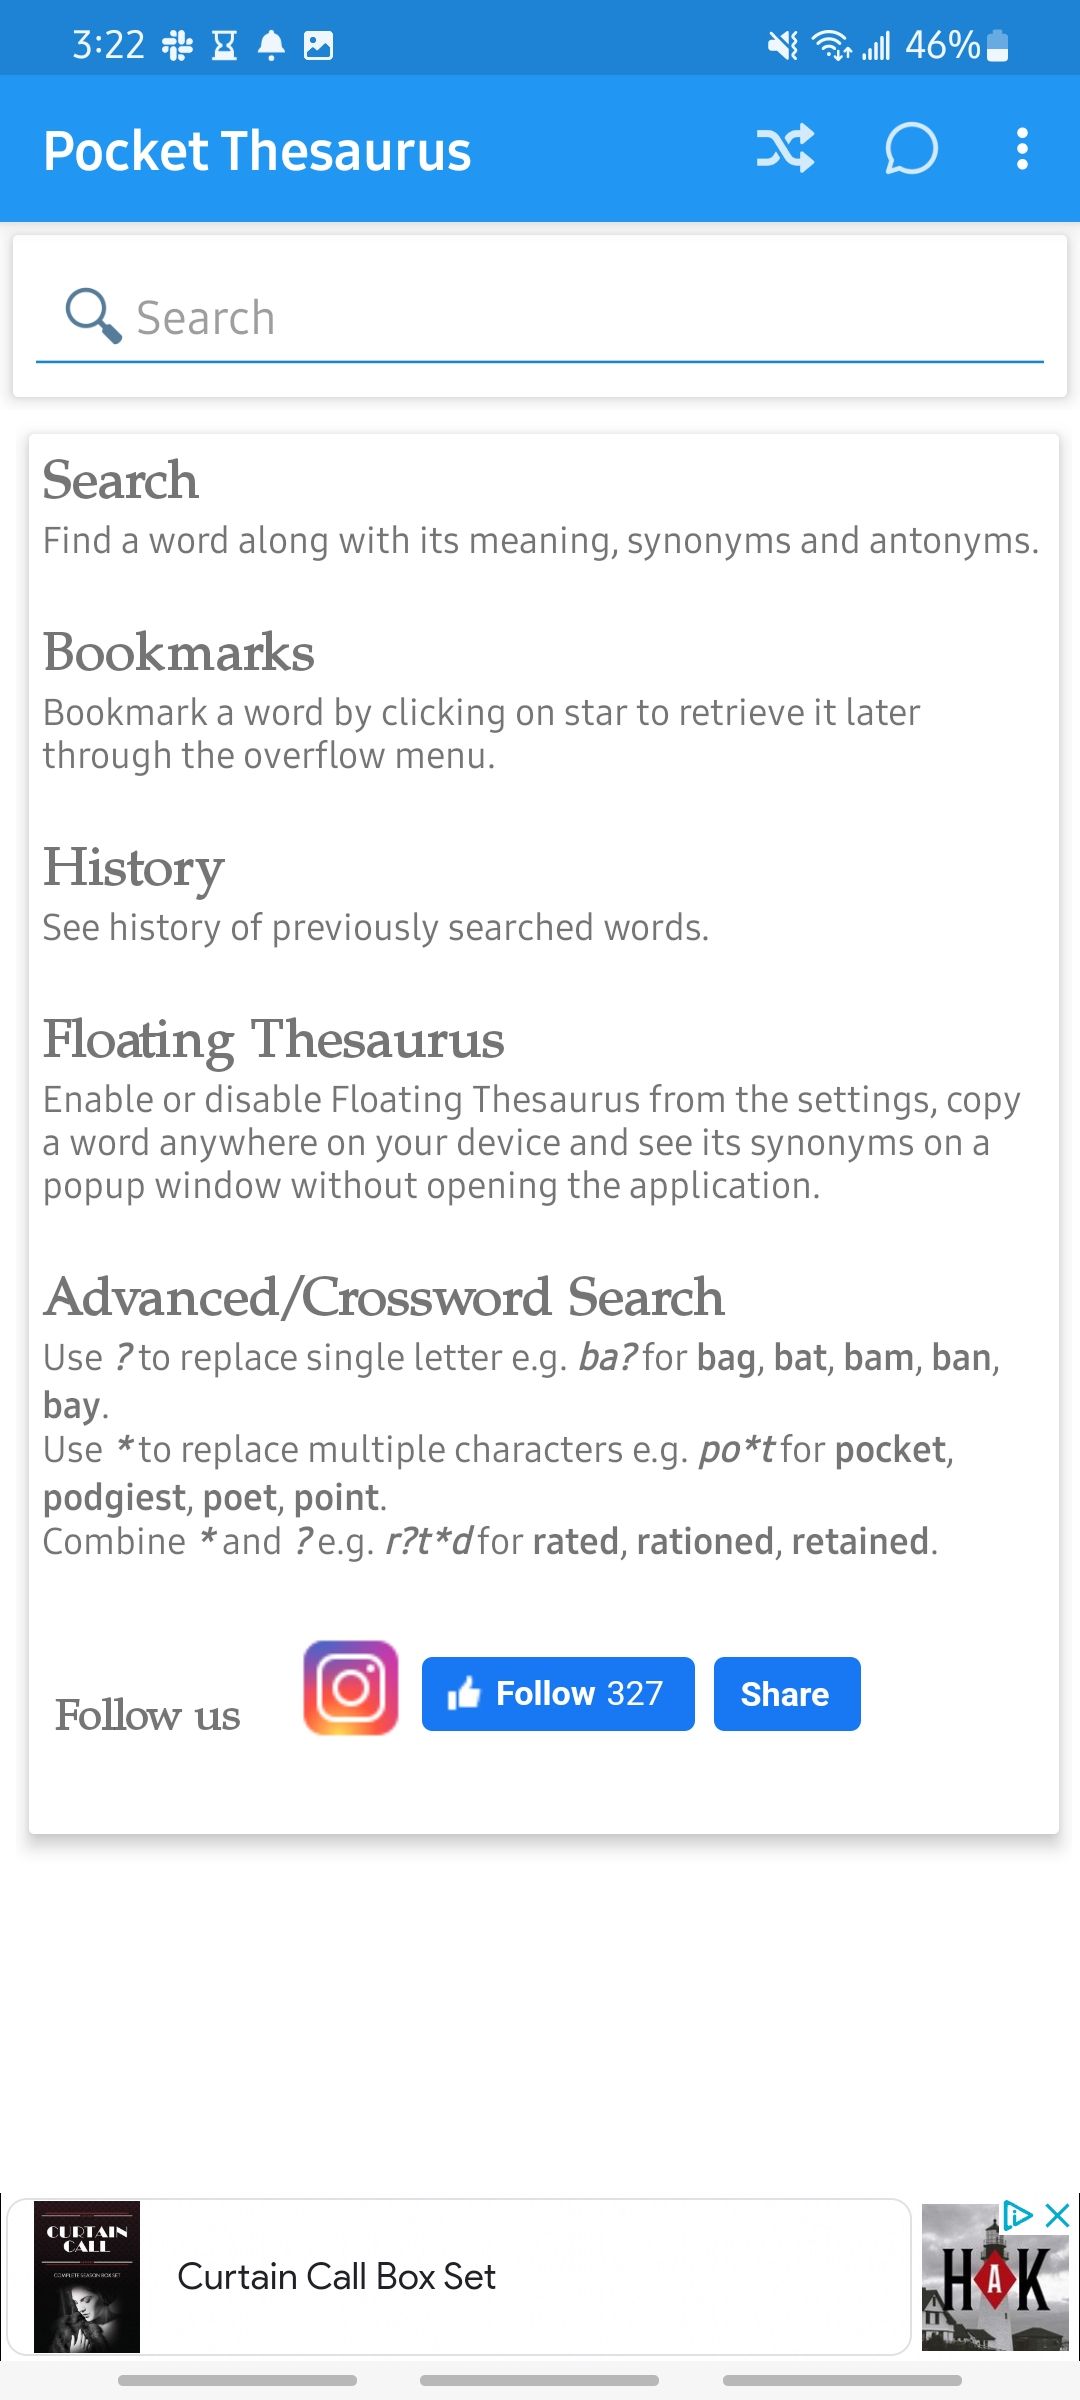 Screenshot of the Pocket Thesaurus app home screen with search bar